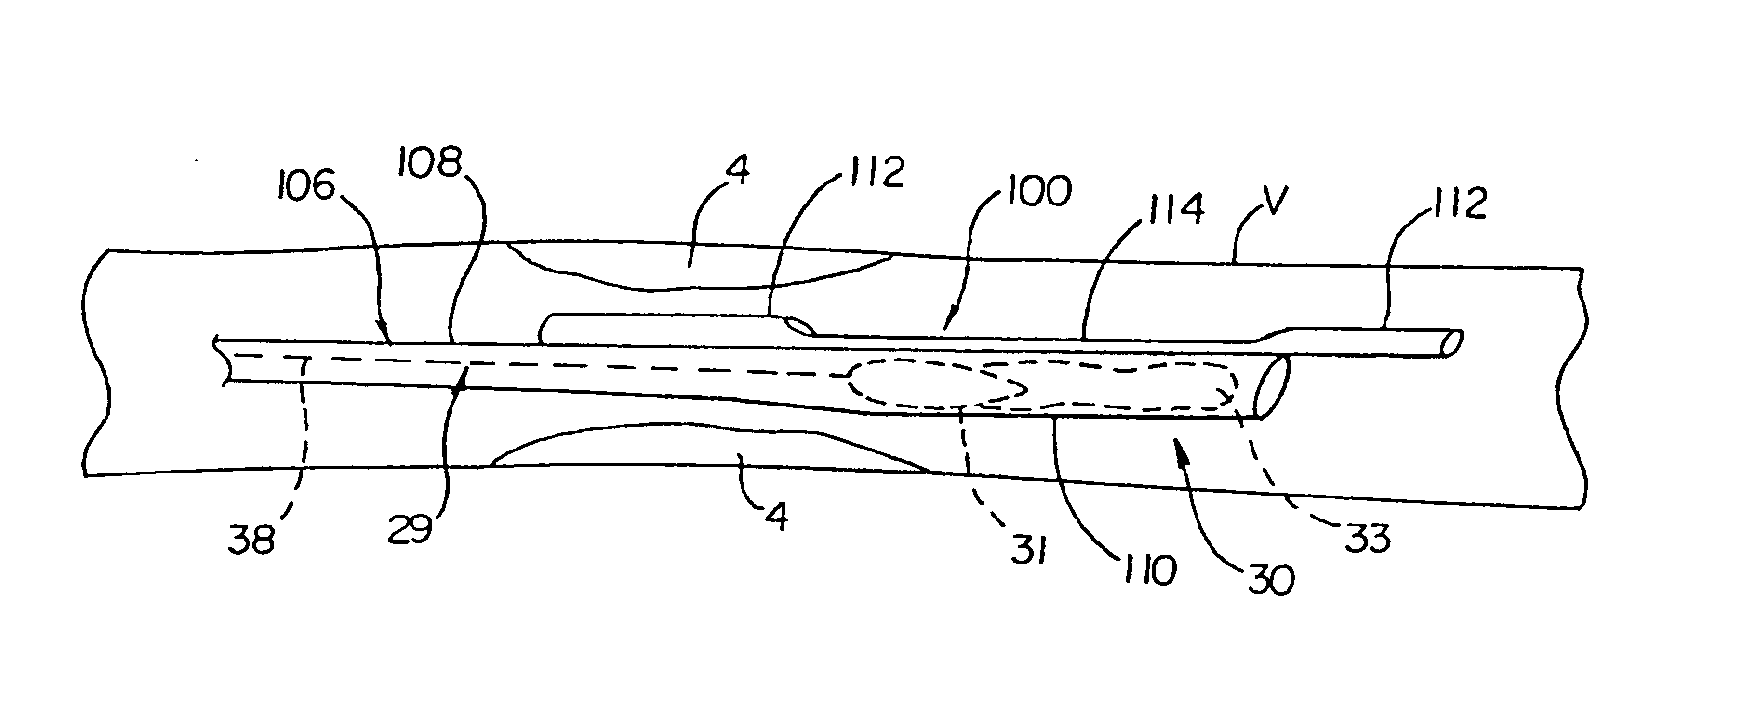 Vascular embolic filter exchange devices and methods of use thereof